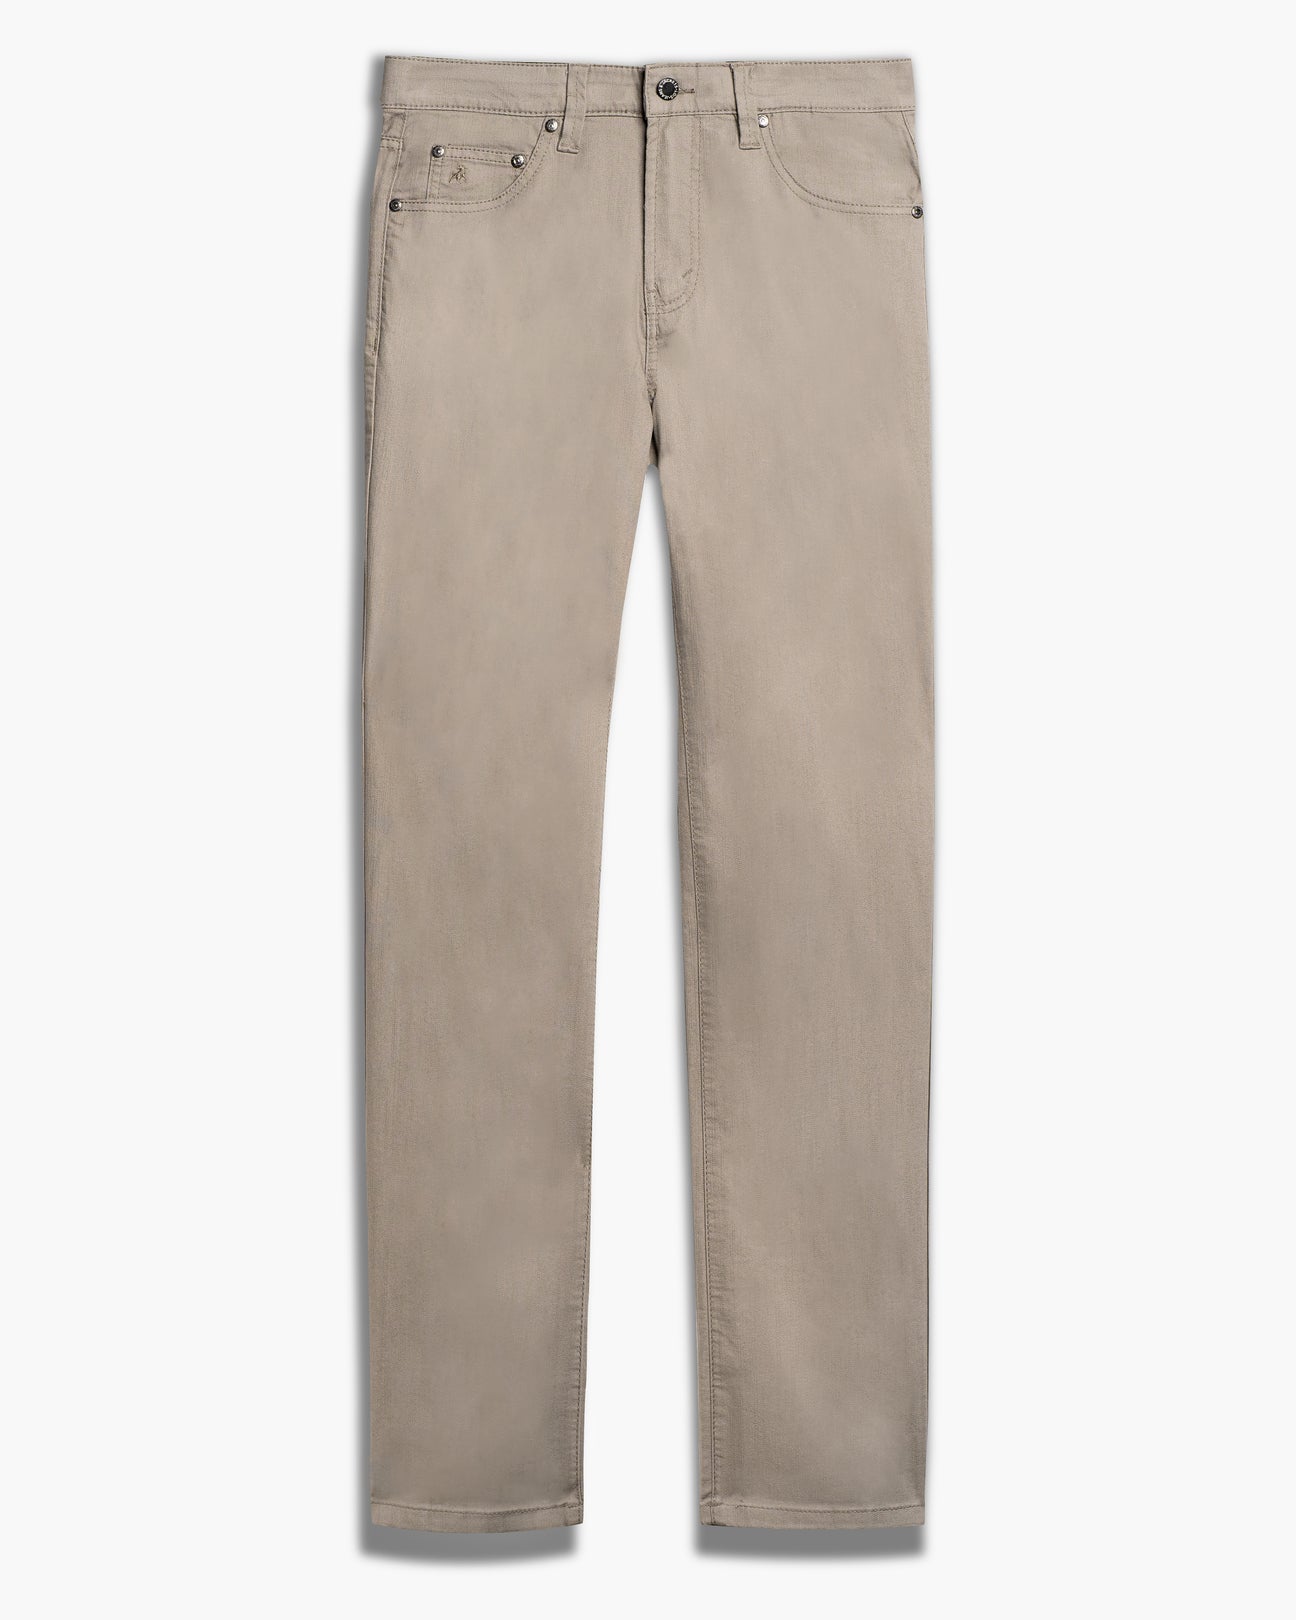 Men's Pants – Broderick's Clothing Co.